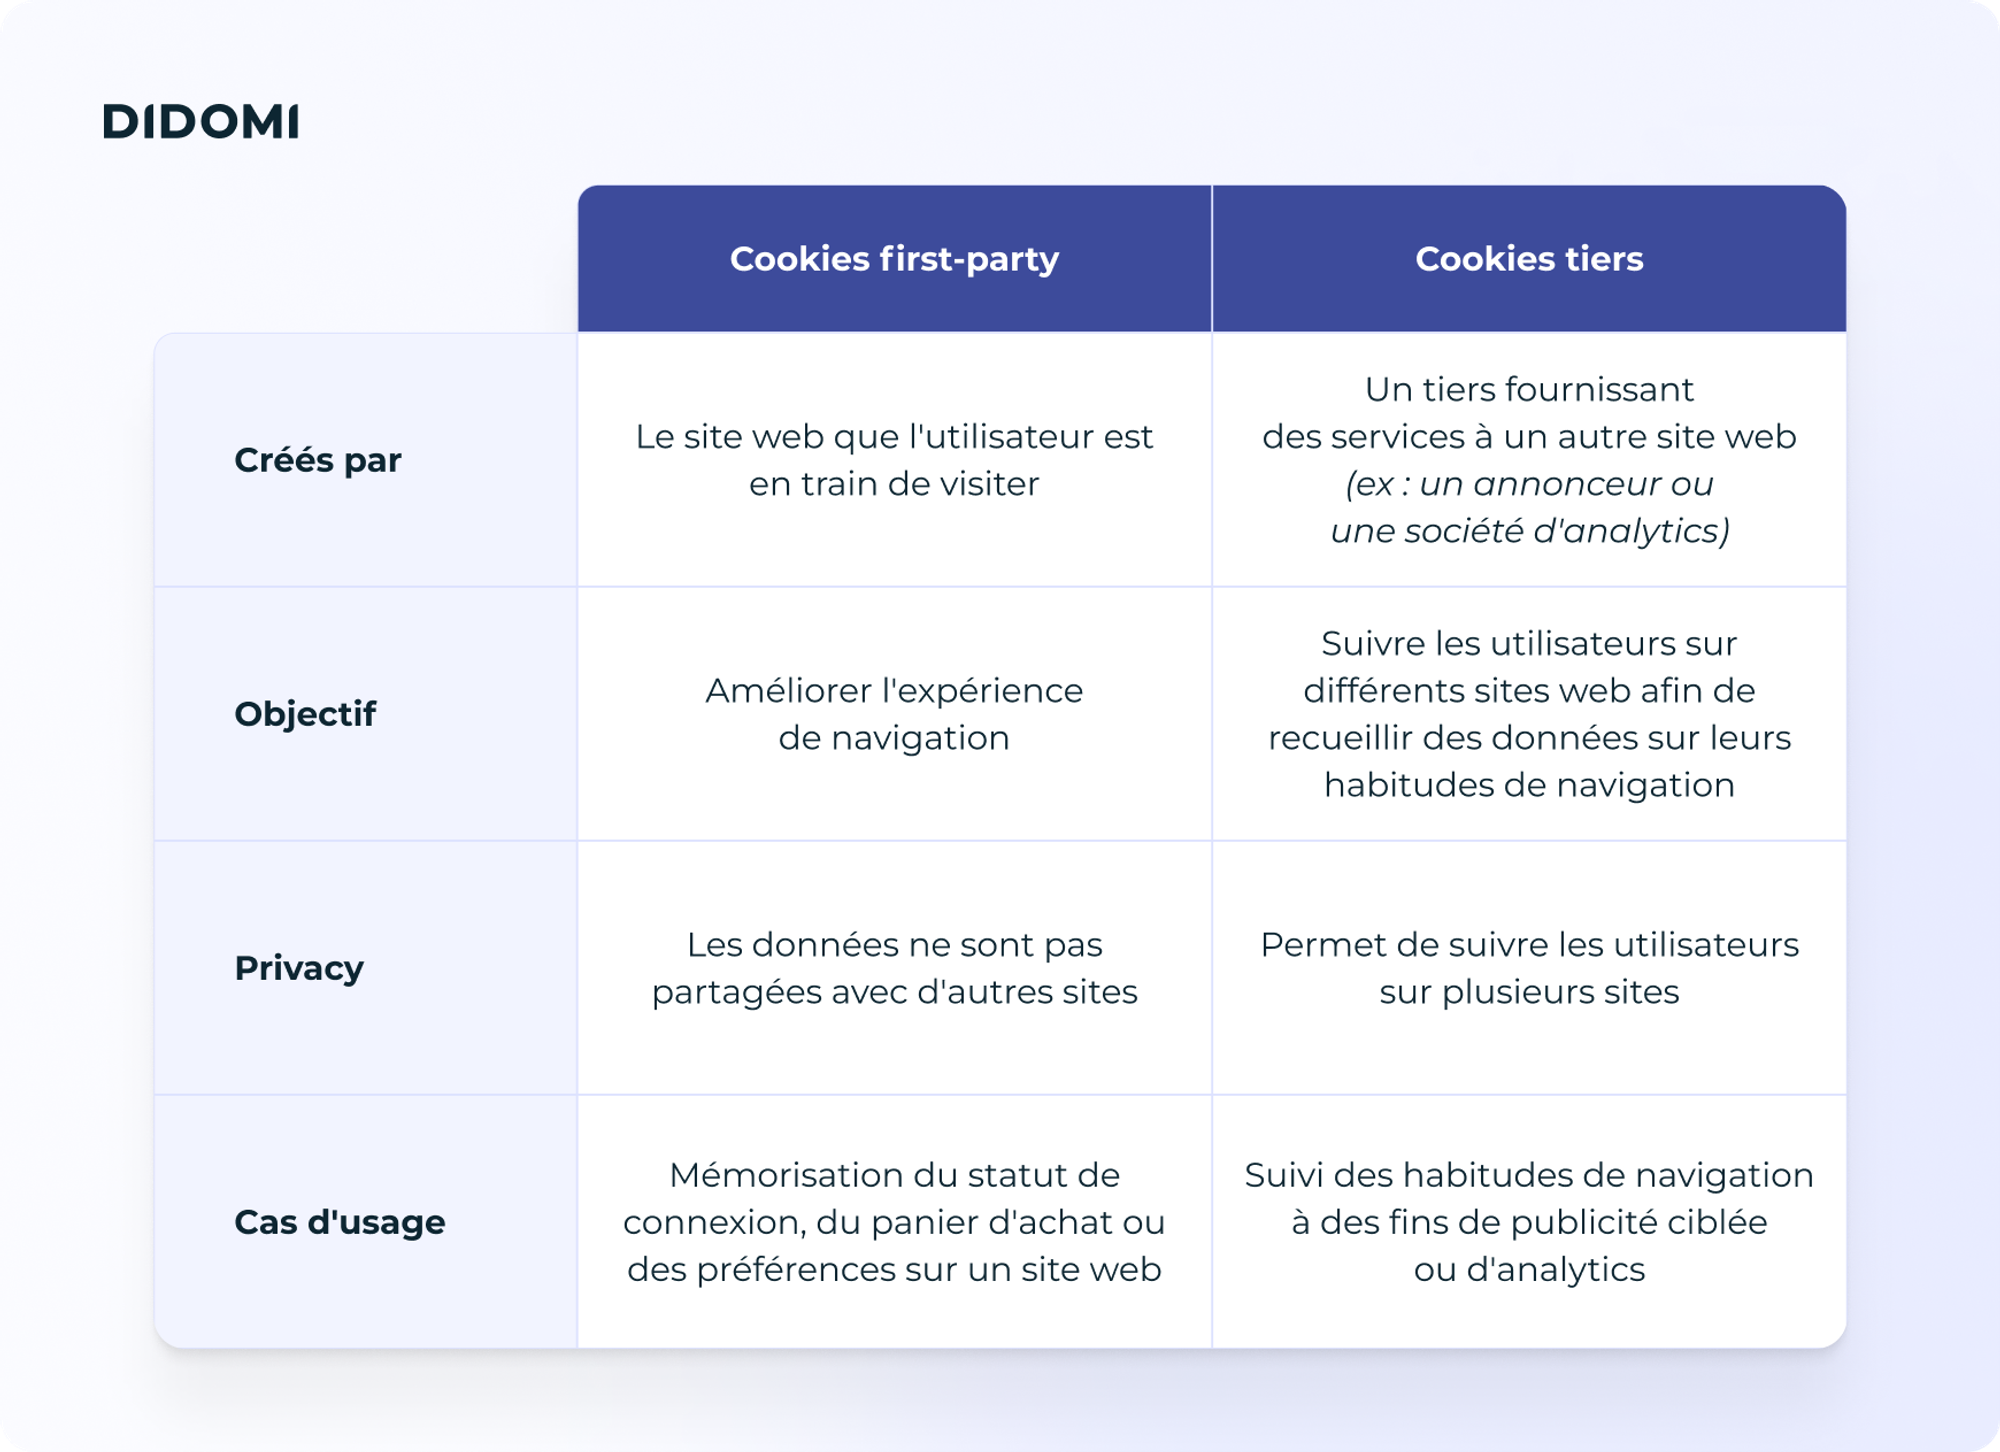 tableau comparant les cookies first-party et cookies tiers 